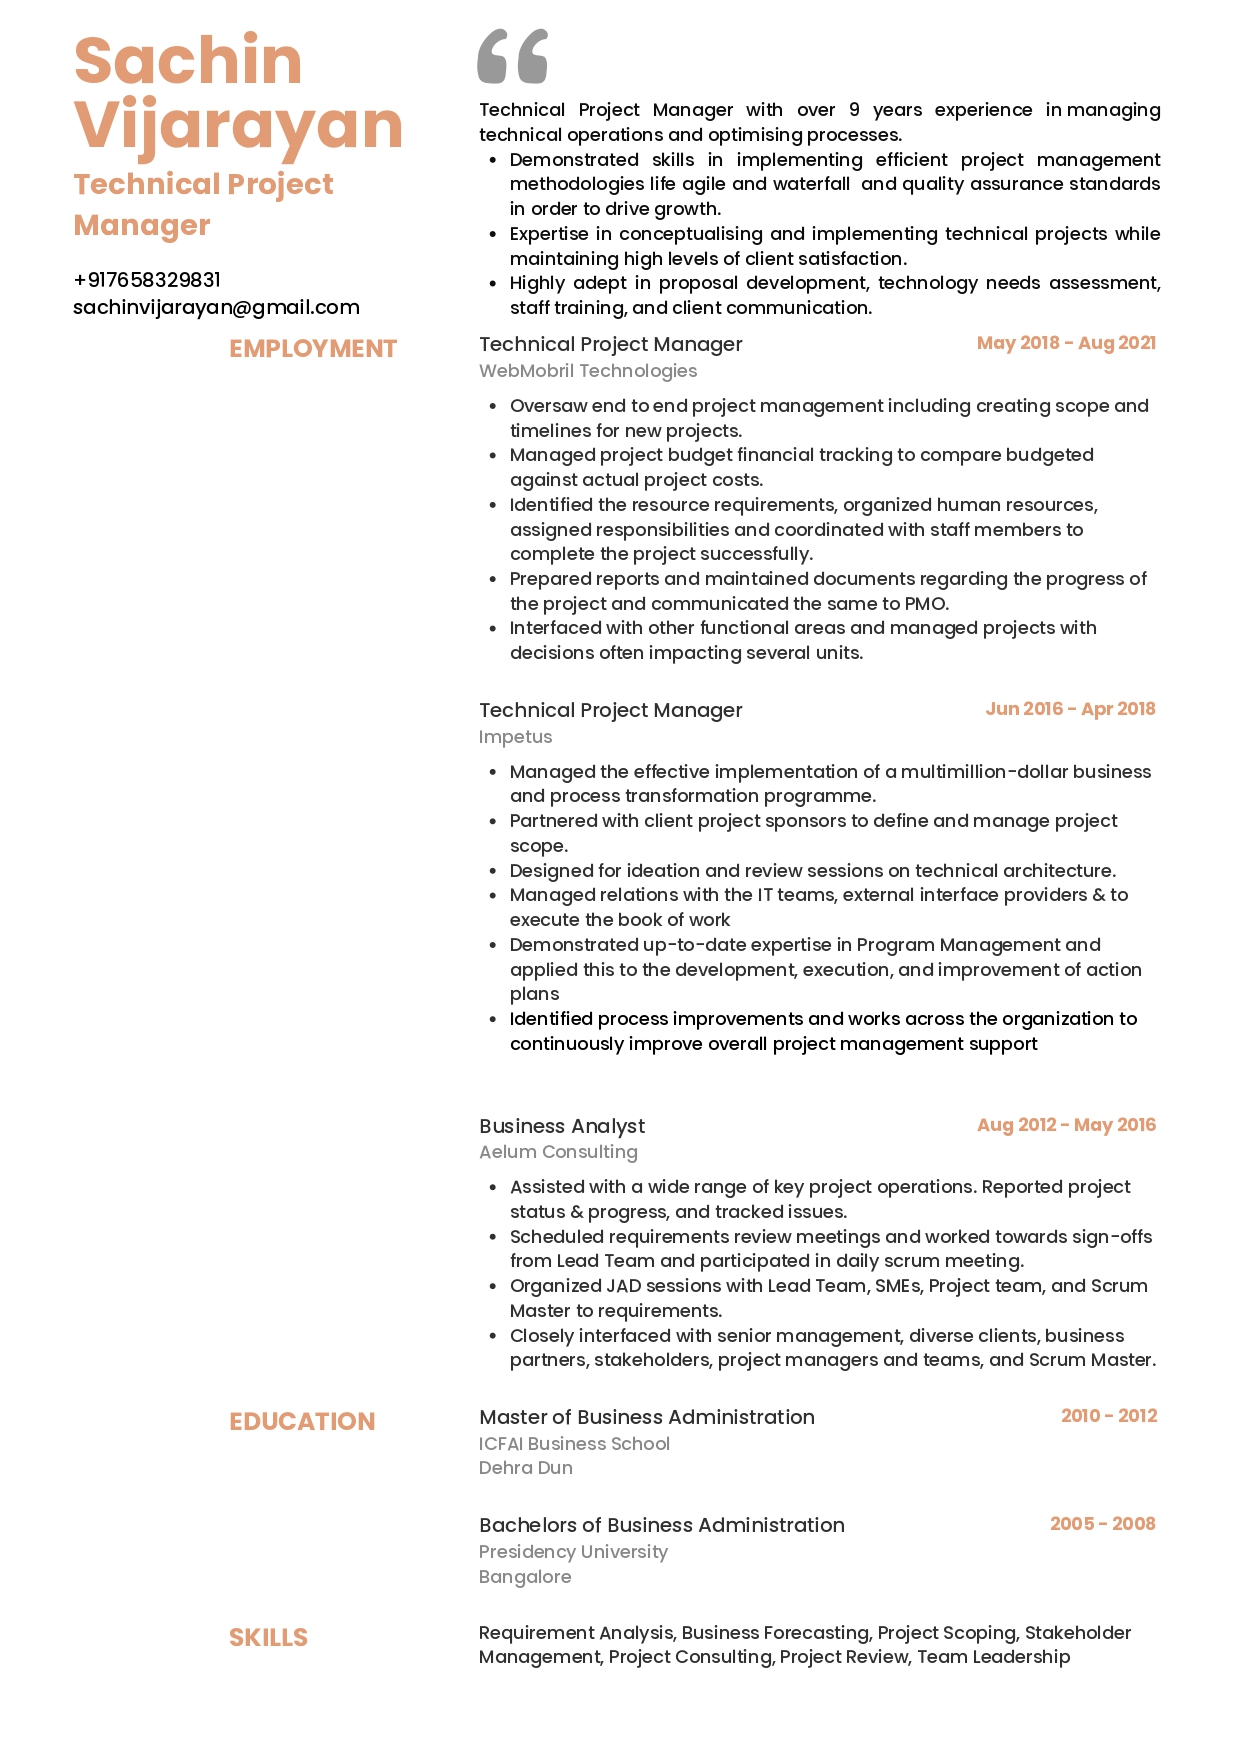 Resume of Technical Project Manager built on Resumod